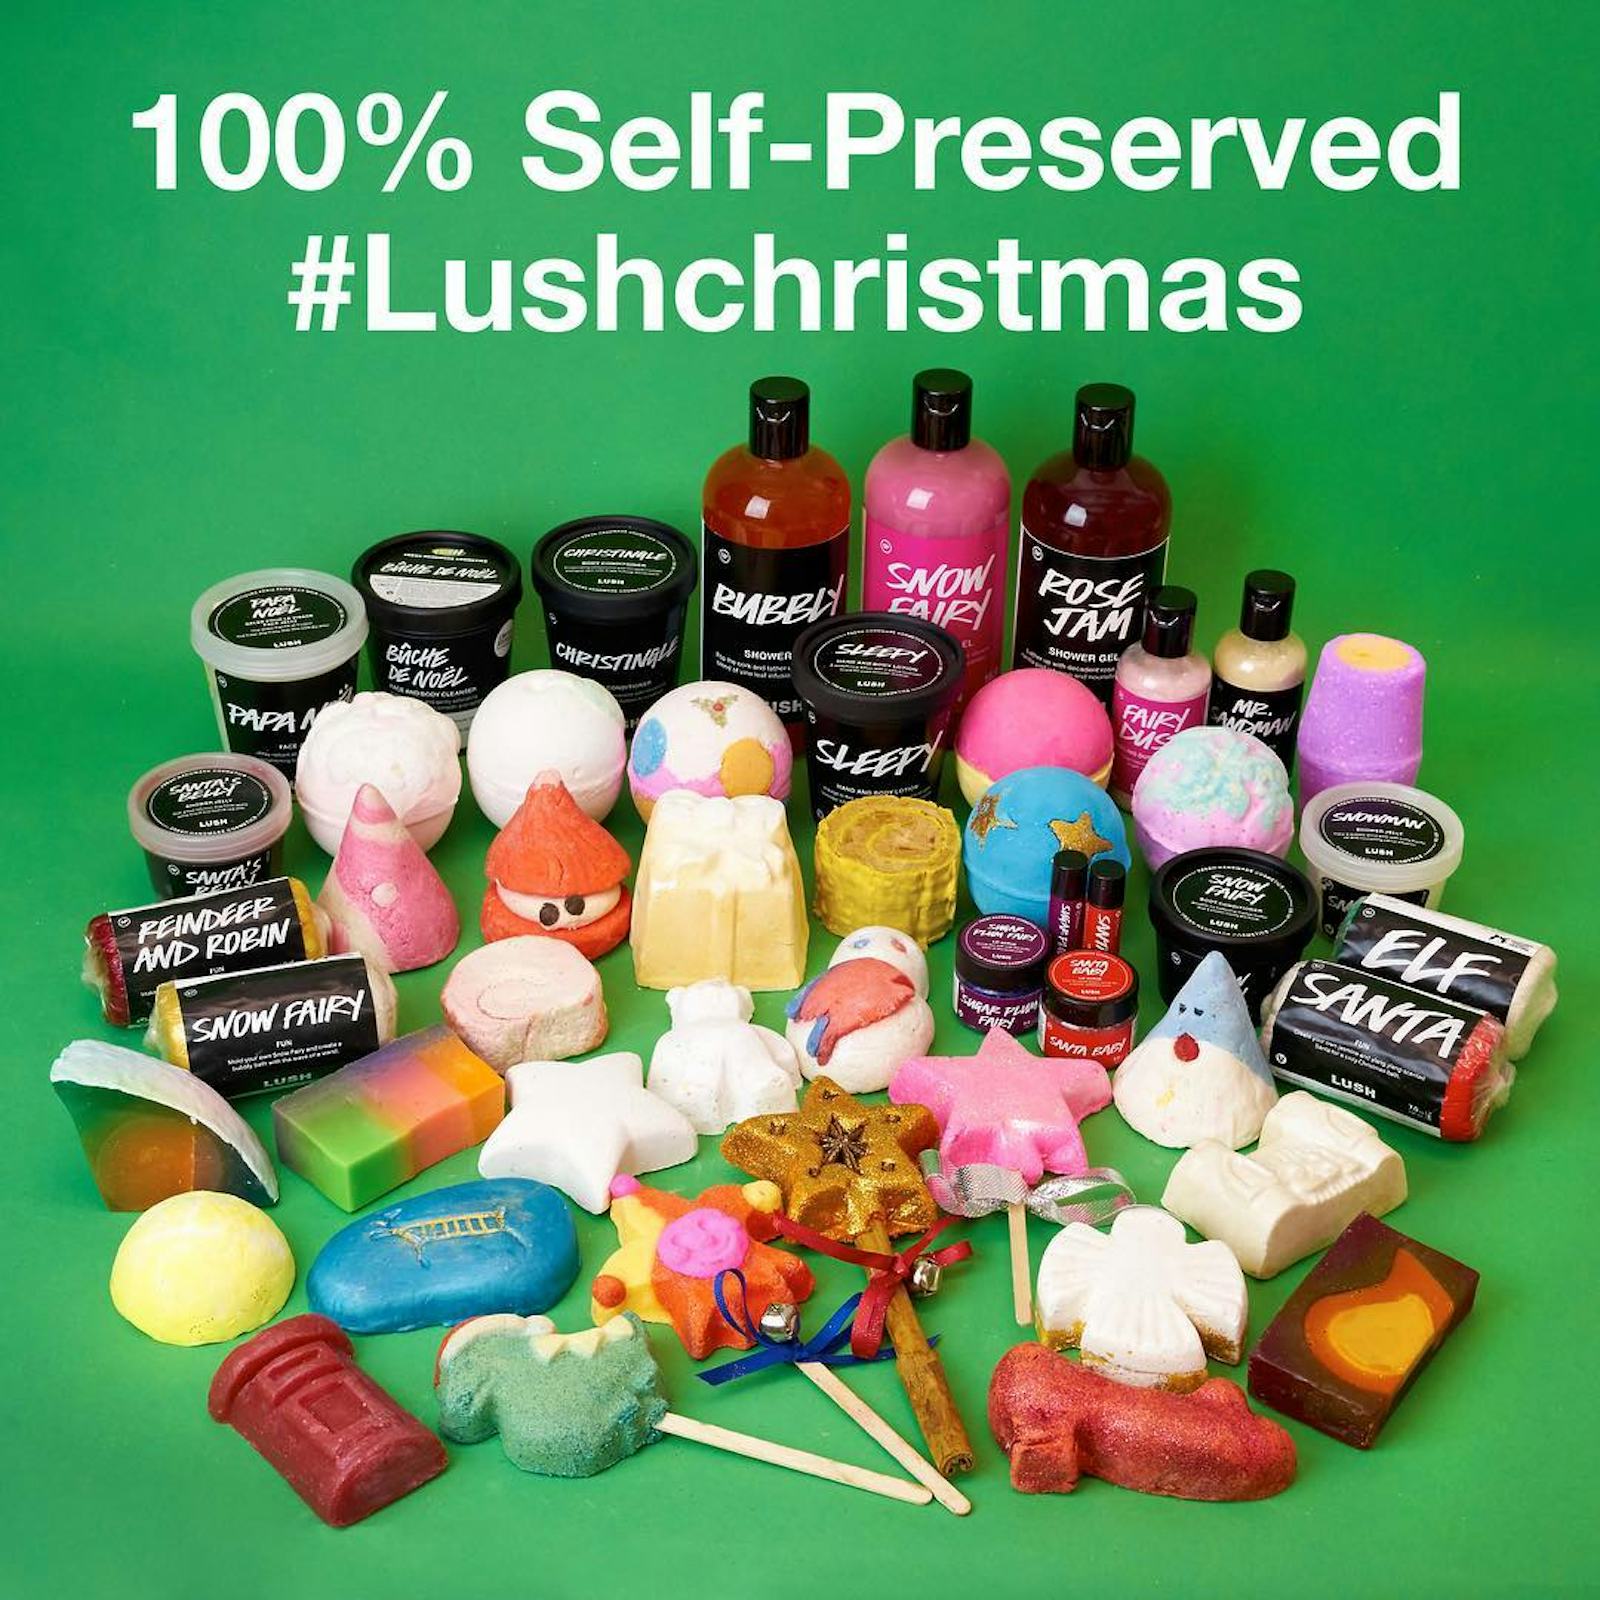 Lush's 2016 Holiday Collection Is SelfPreserving, But What Does That